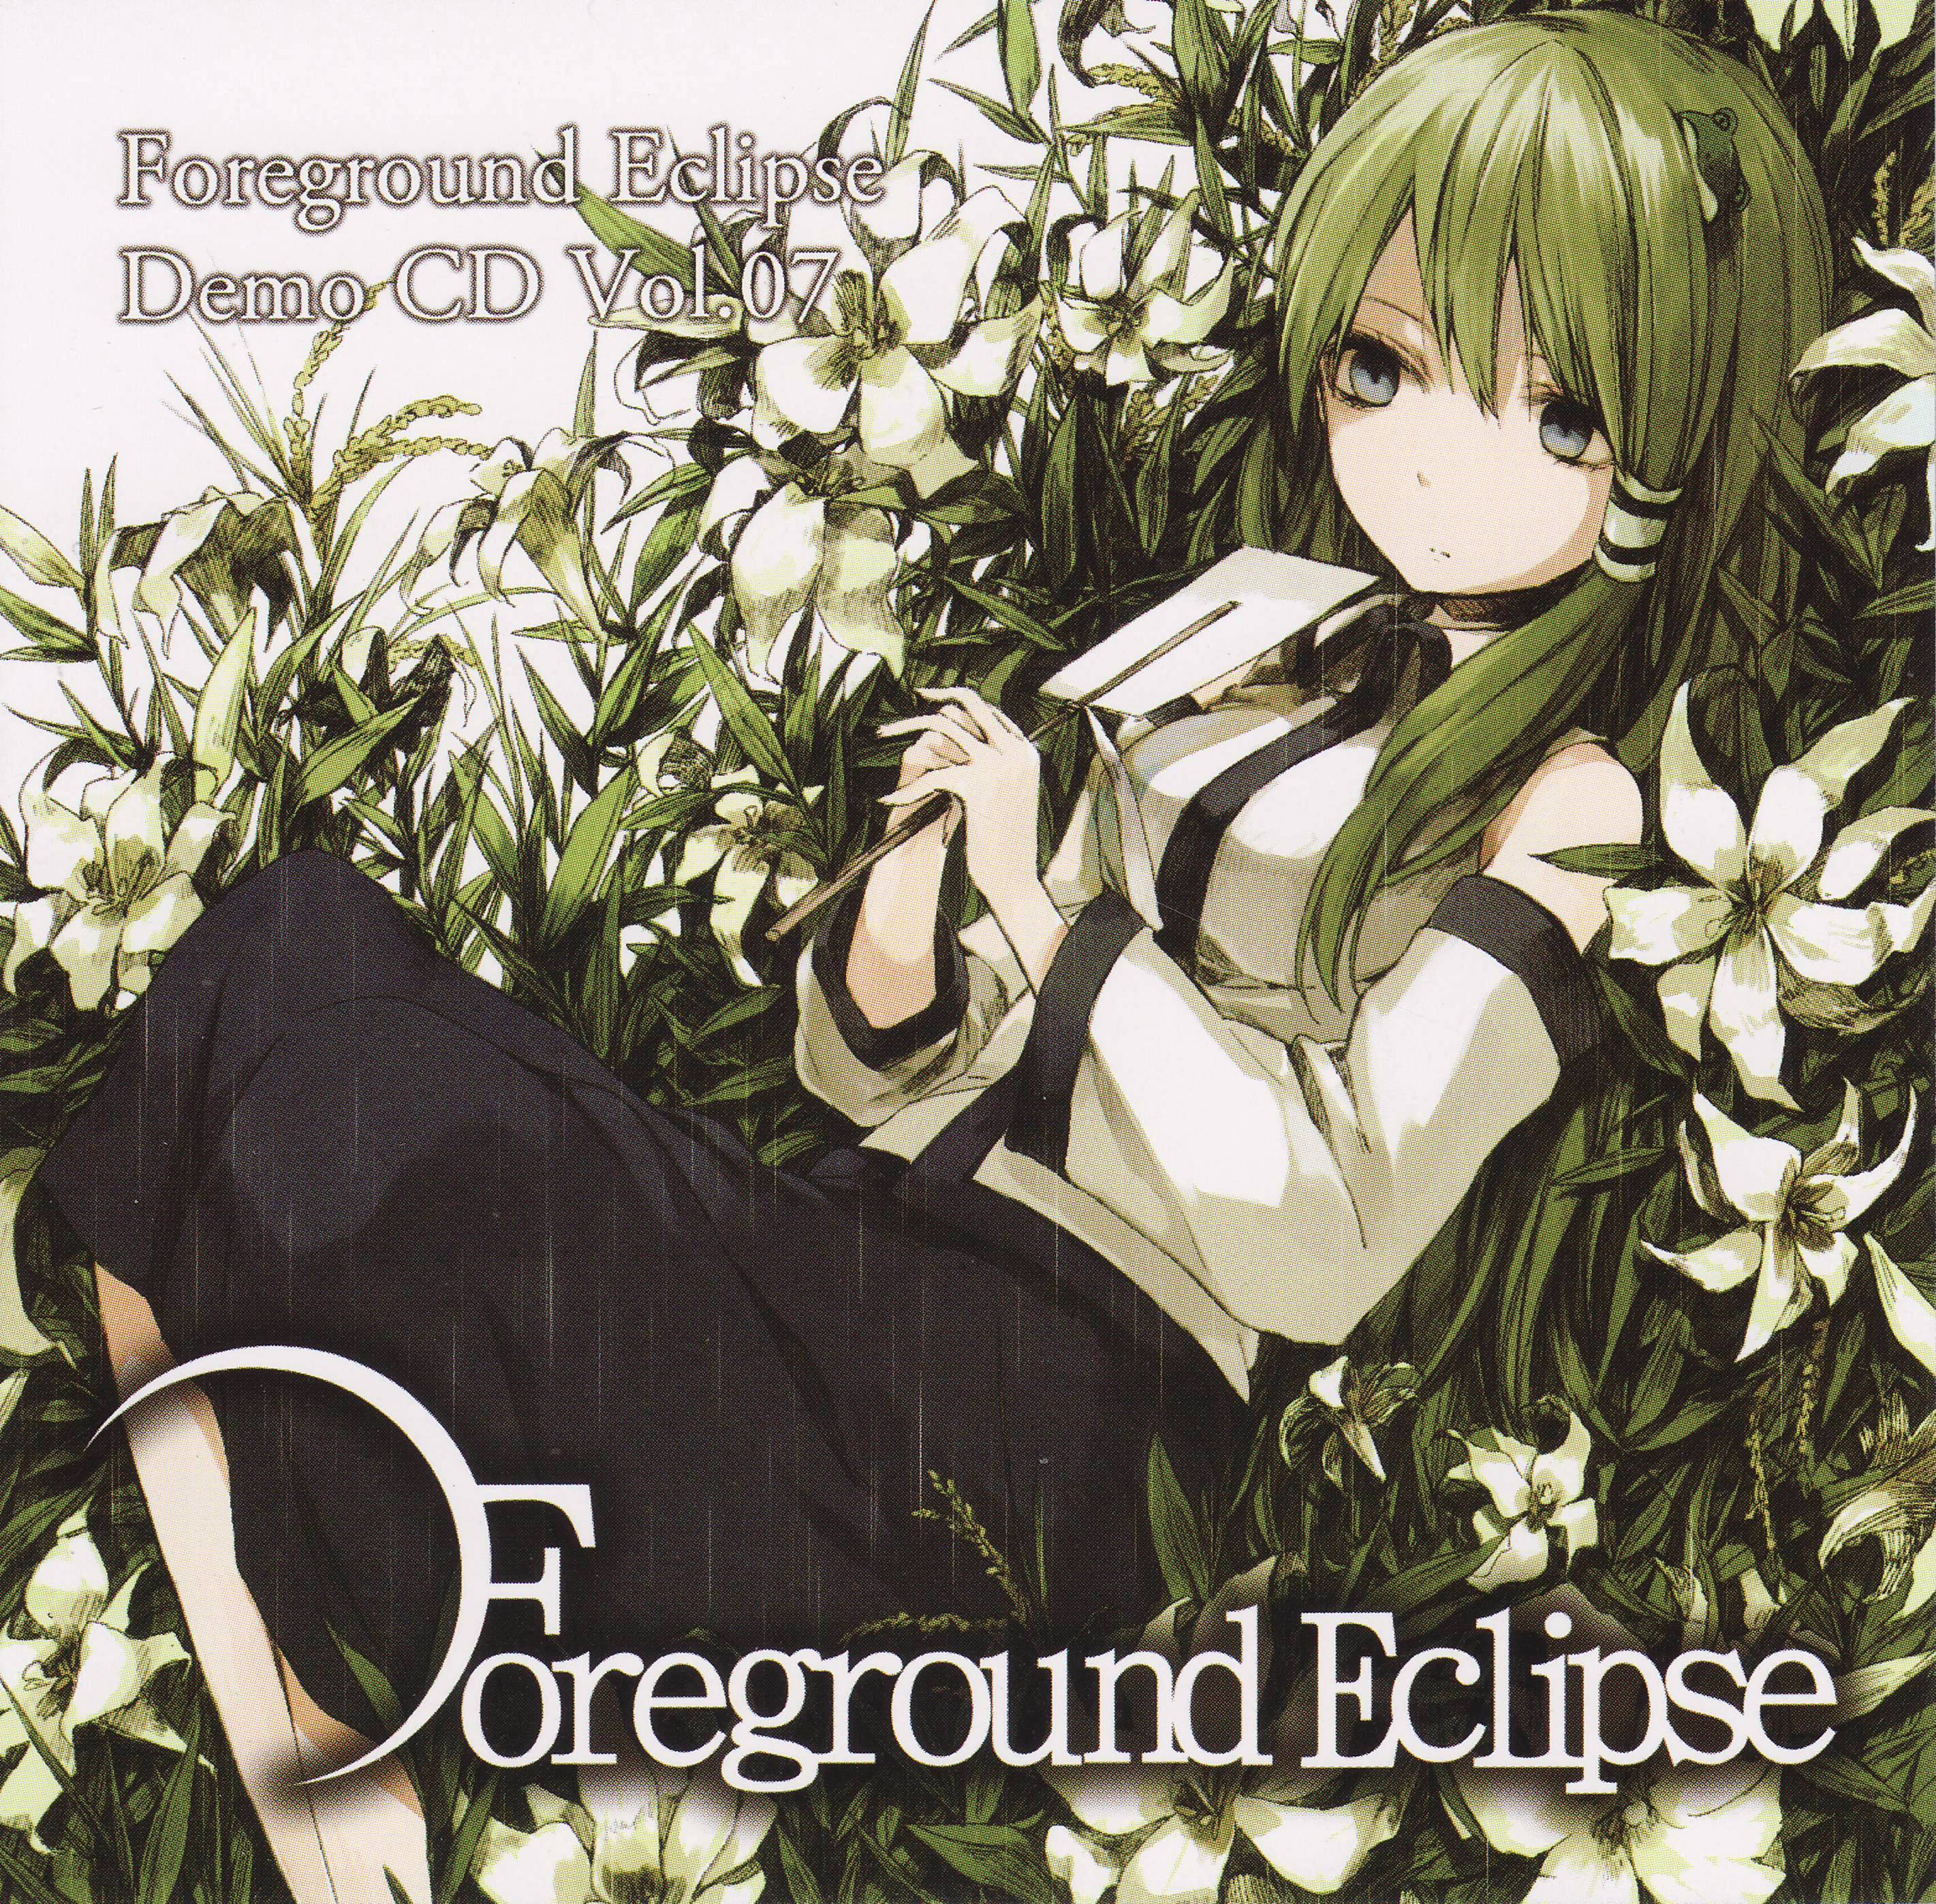 Foreground Eclipse Demo CD Vol.07 - てと, Foreground Eclipse feat